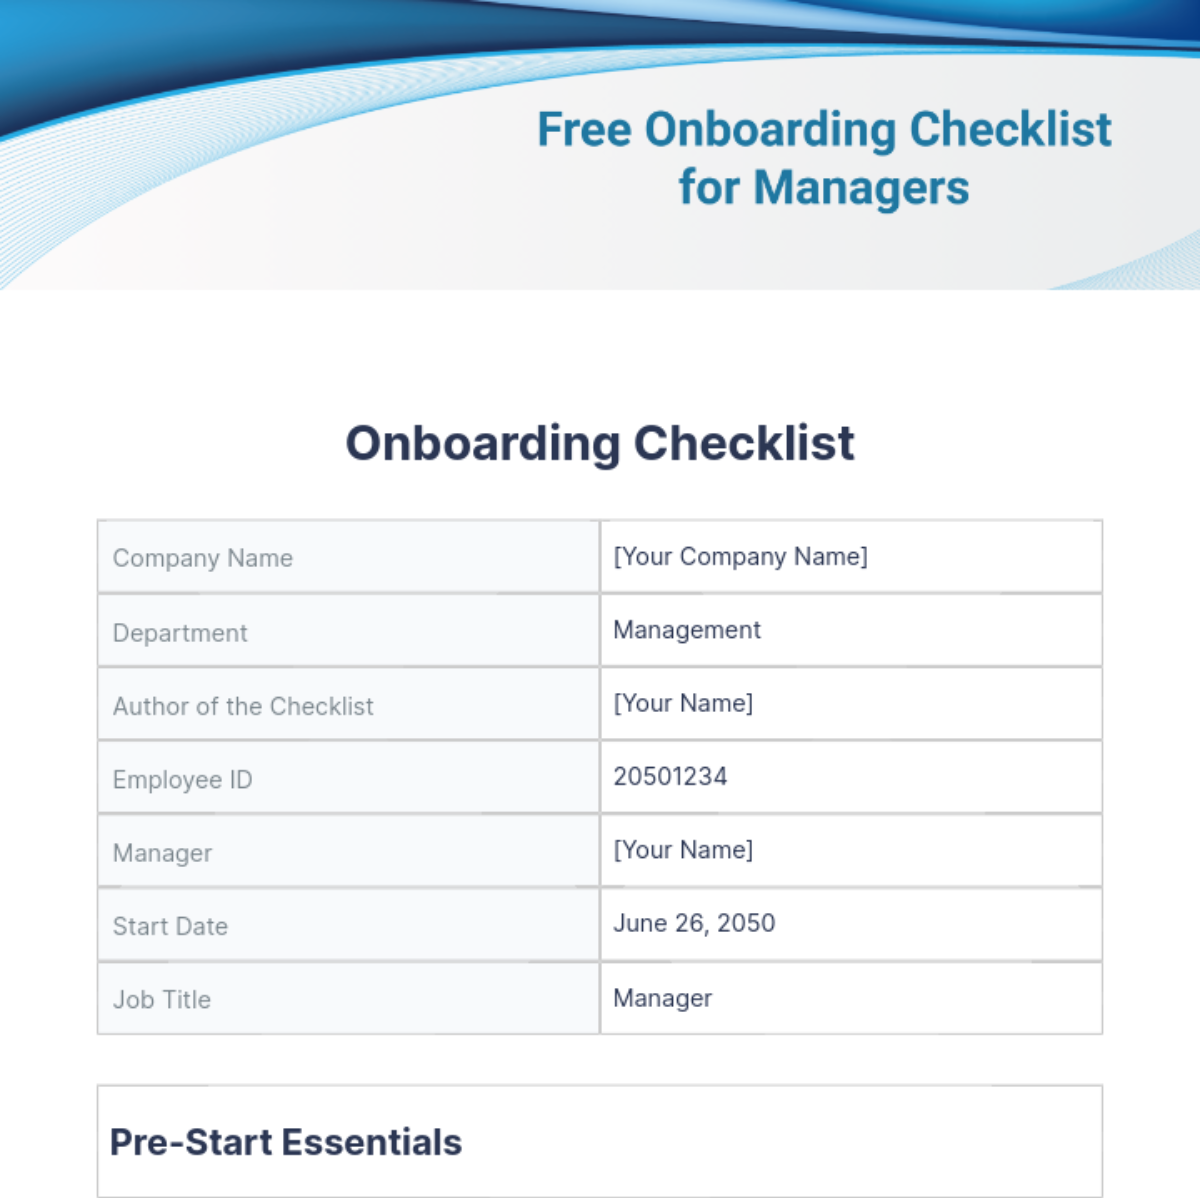 Onboarding Checklist for Managers Template